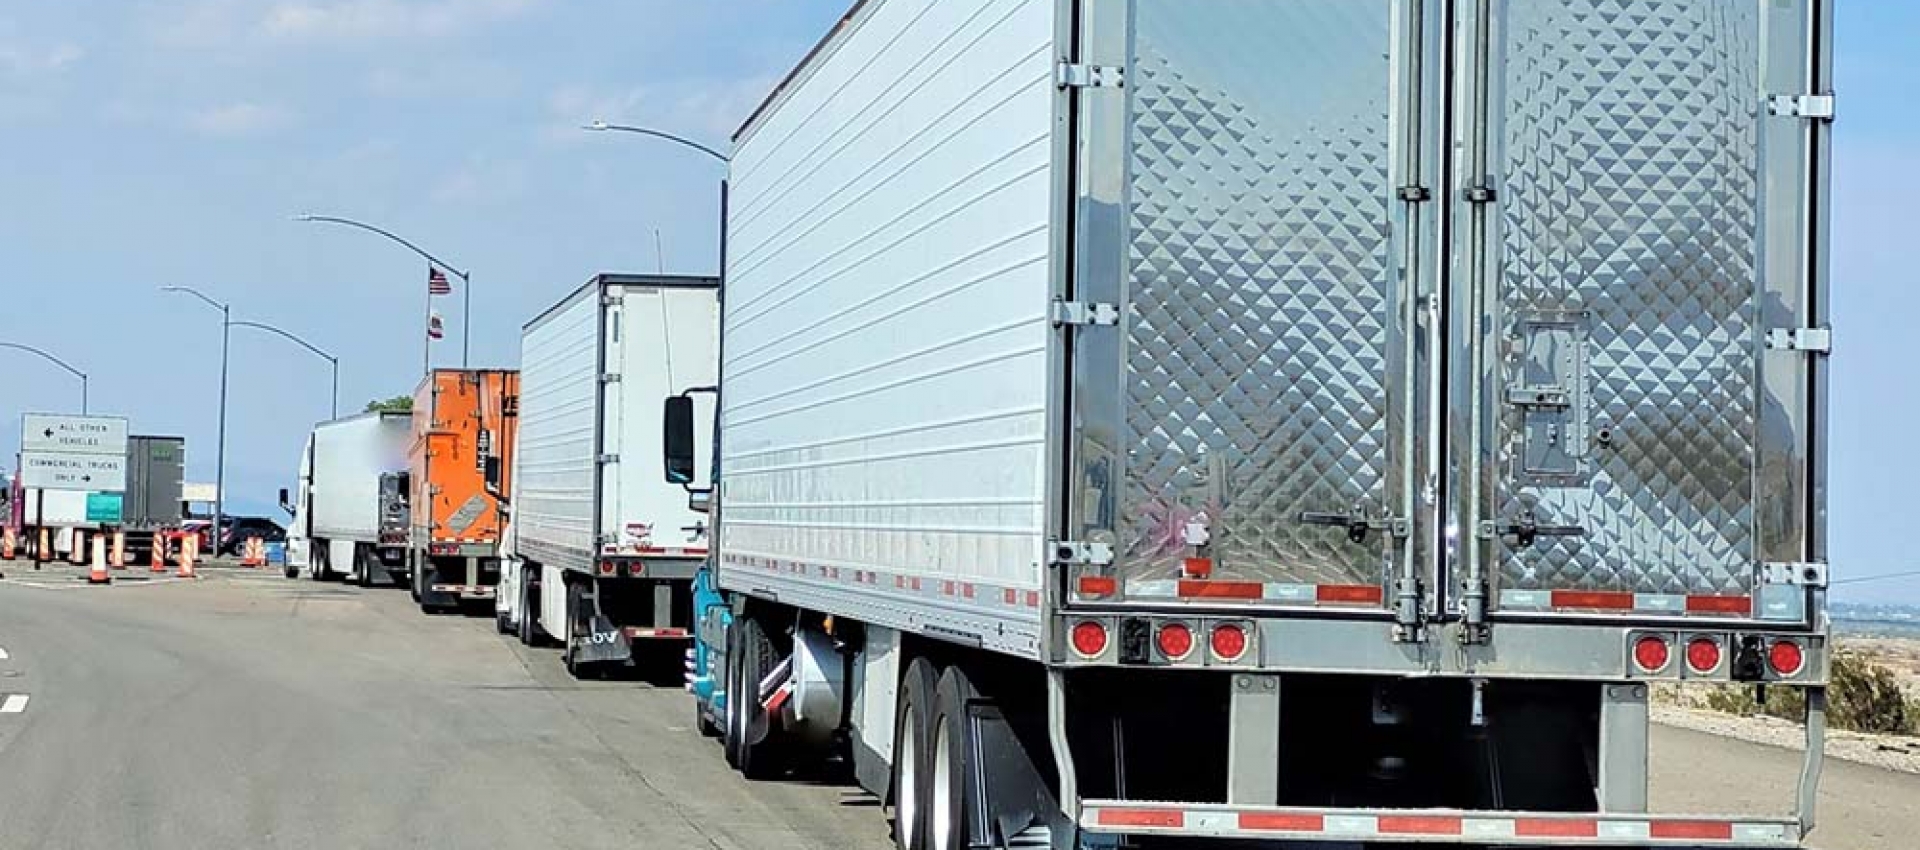 What Tests Do I Have to Take to Get My CDL?